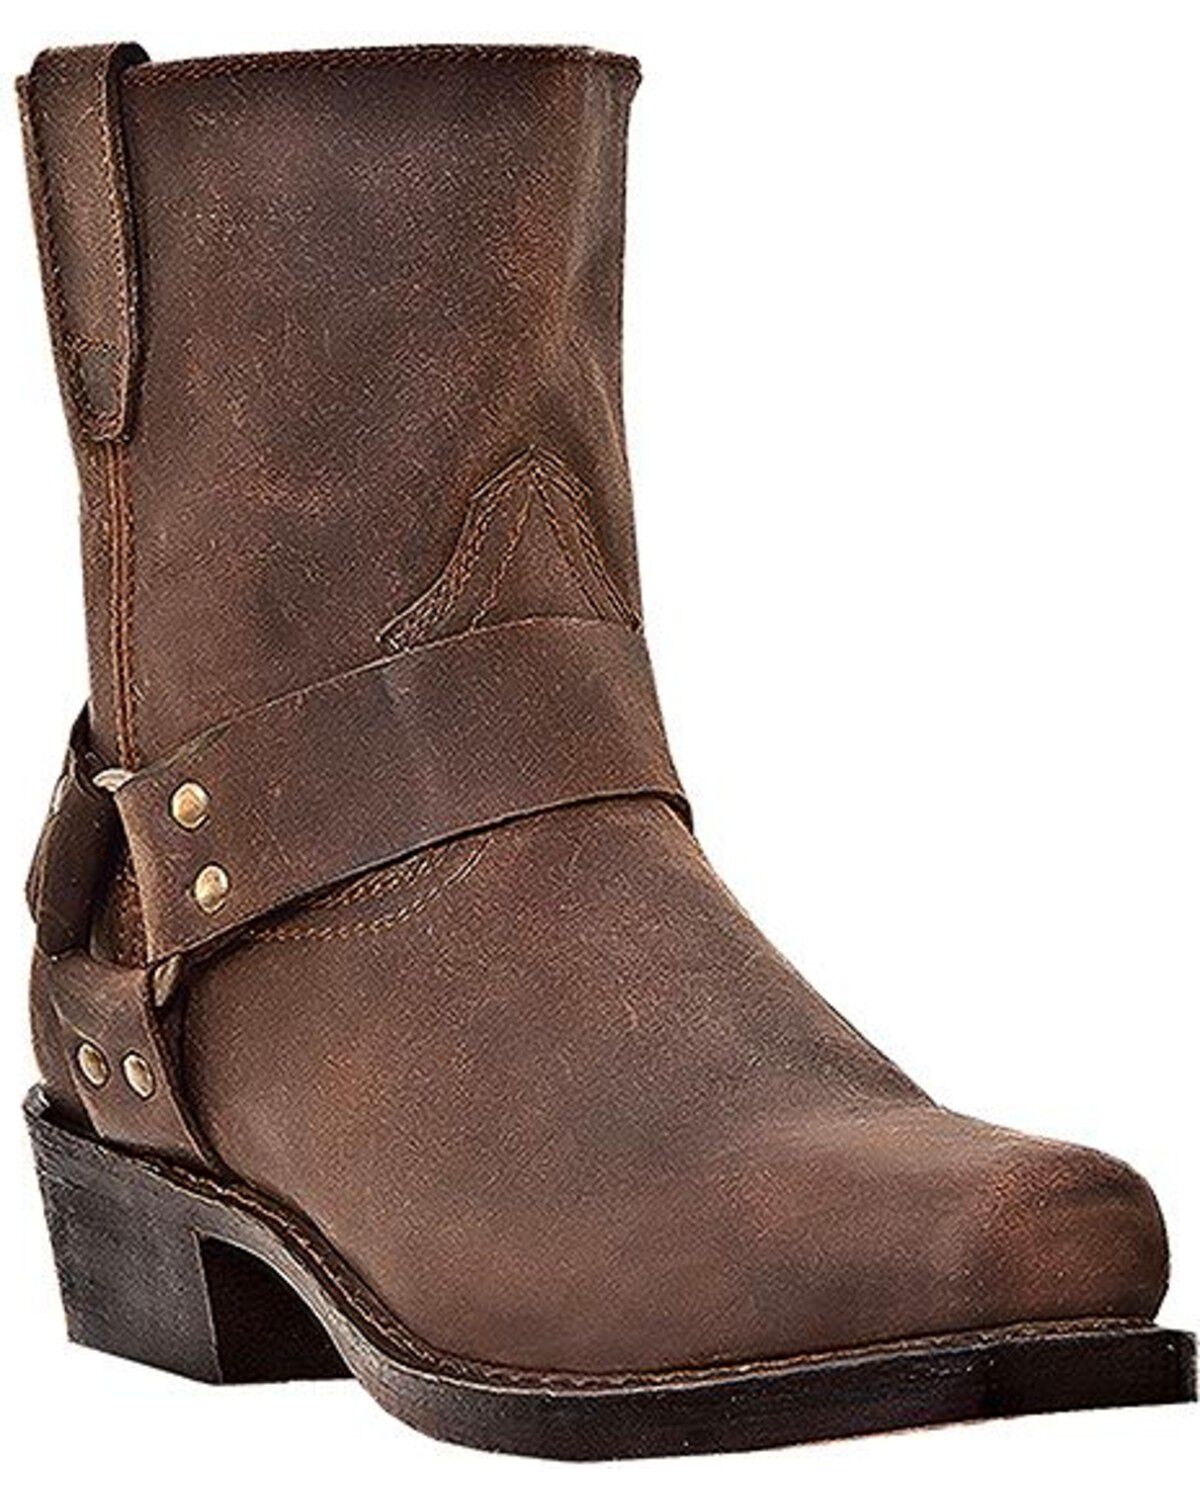 WT10 Men's Western Cowboy Motorcycle Ankle Boots 